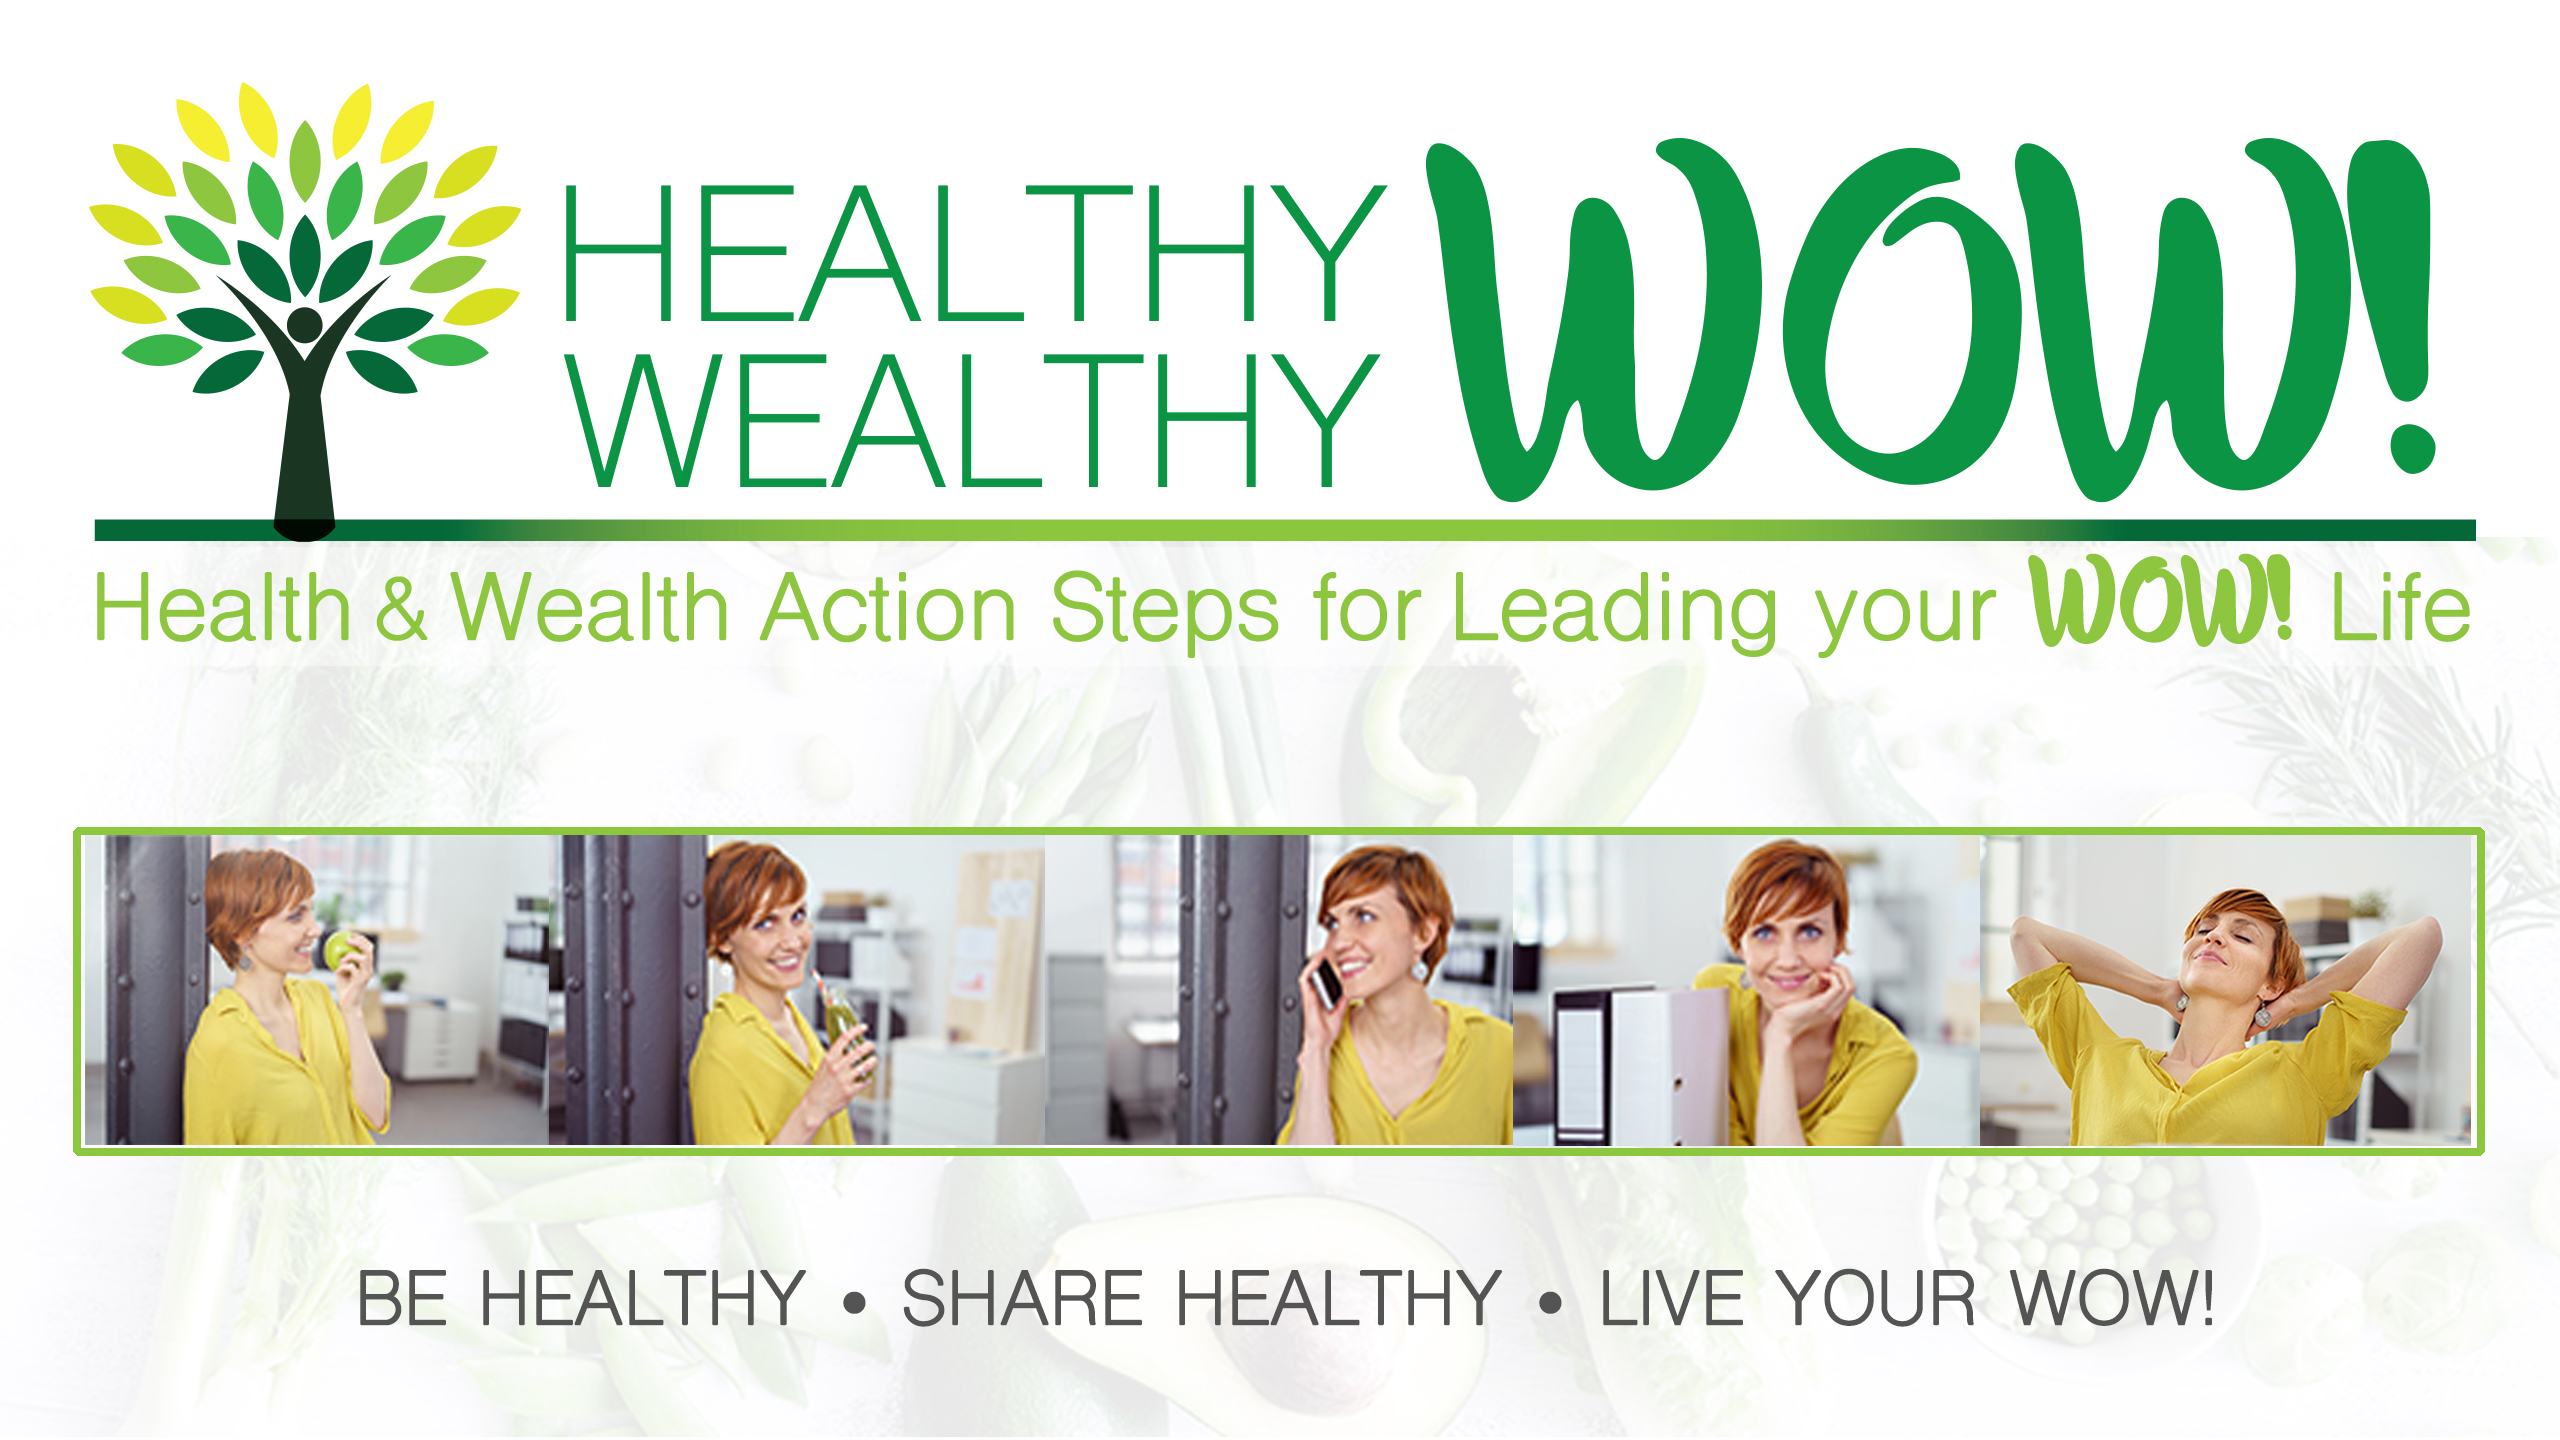 Find Healthy Wealthy Wow online at www.healthywealthywow.com